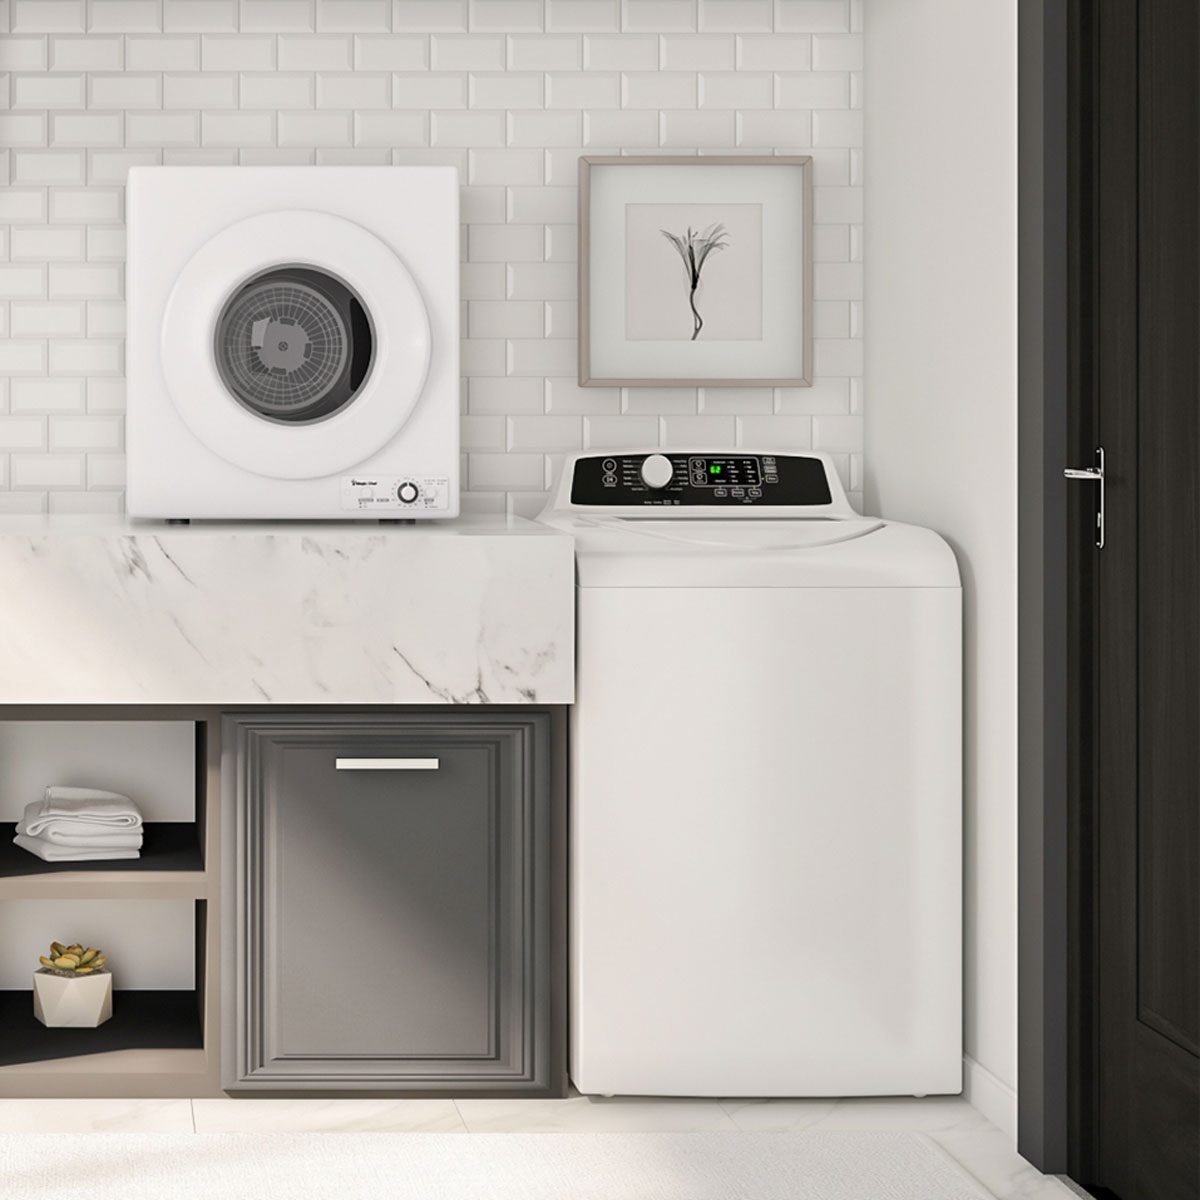 The 5 Most Energy-Efficient Washer and Dryer Sets for a More Sustainable Home